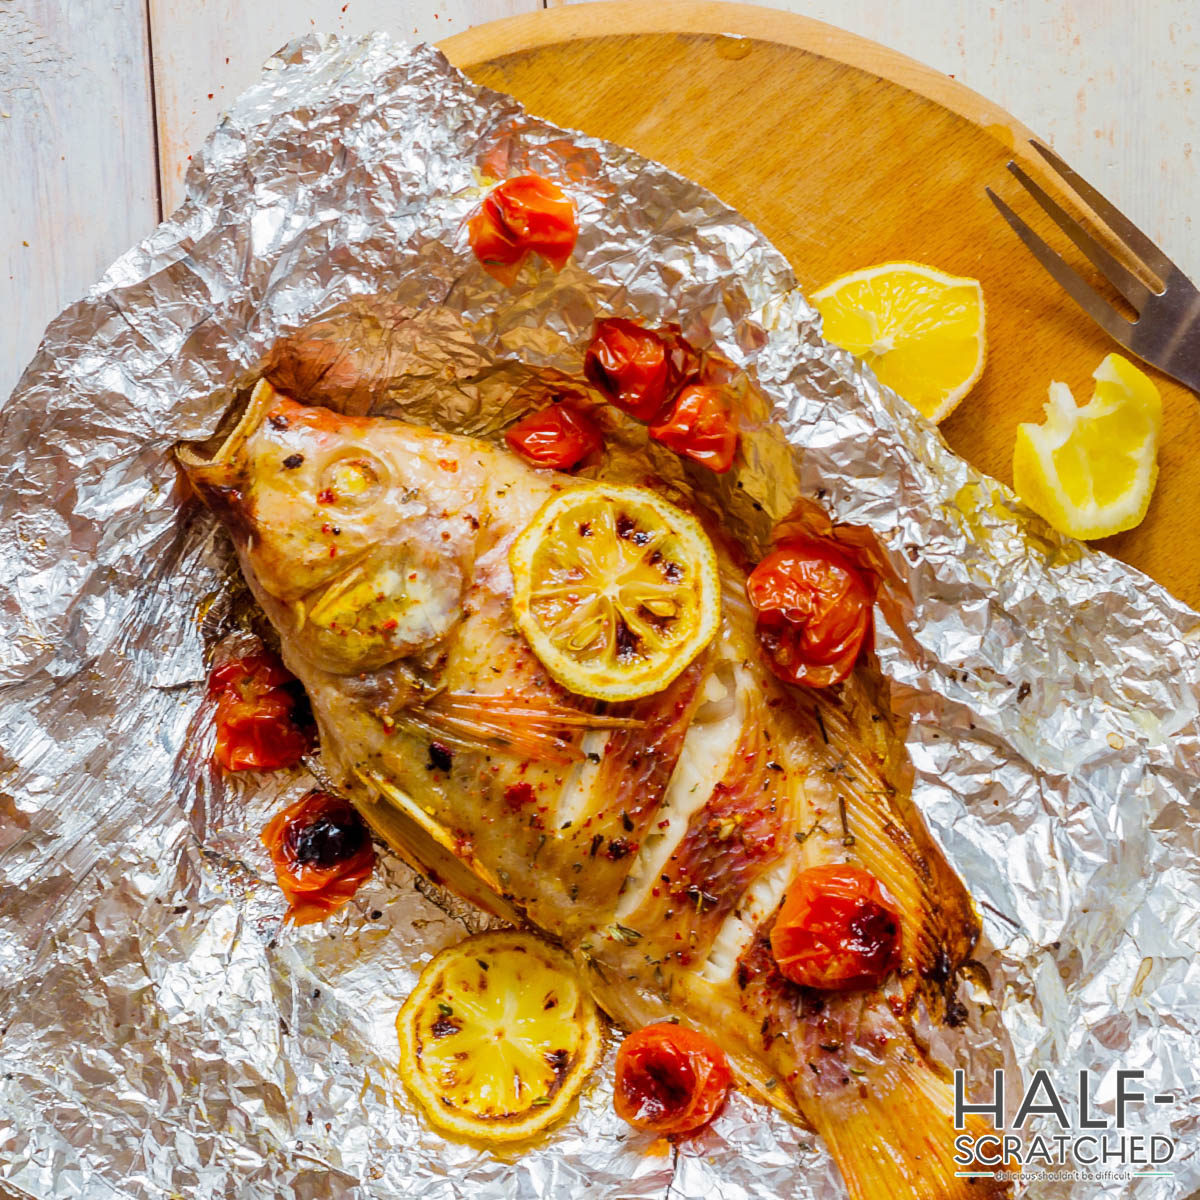 Tilapia wrapped in foil